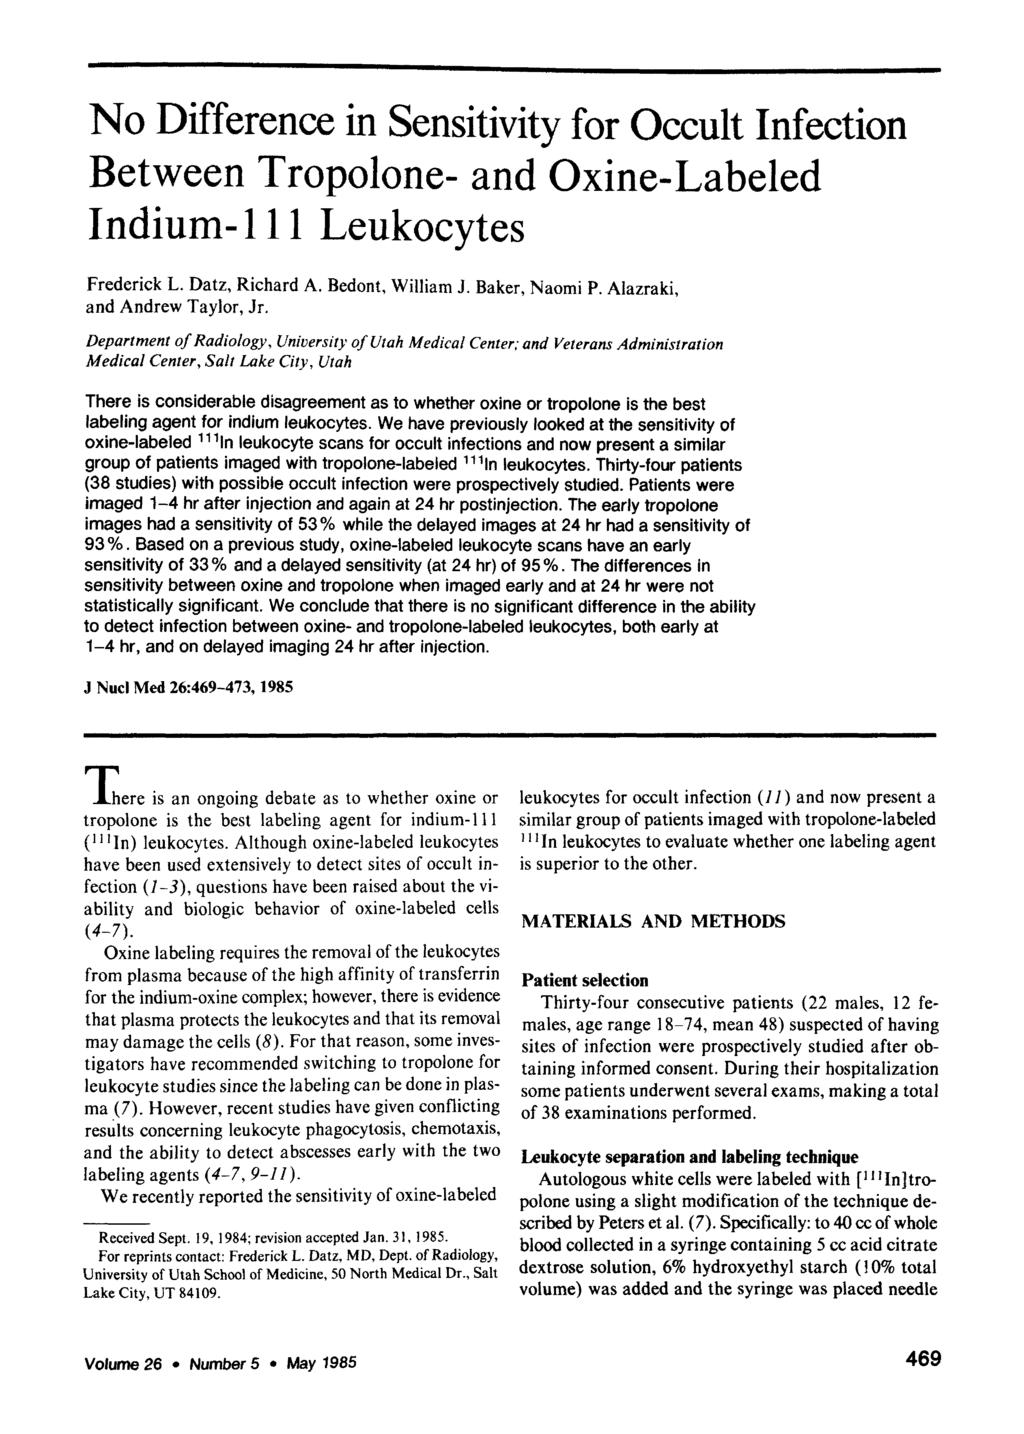 No Difference in Sensitivity for Occult Infection Between Tropolone- and Oxine-Labeled Indium-Ill Leukocytes Frederick L. Datz, Richard A. Bedont, William J. Baker, Naomi P.